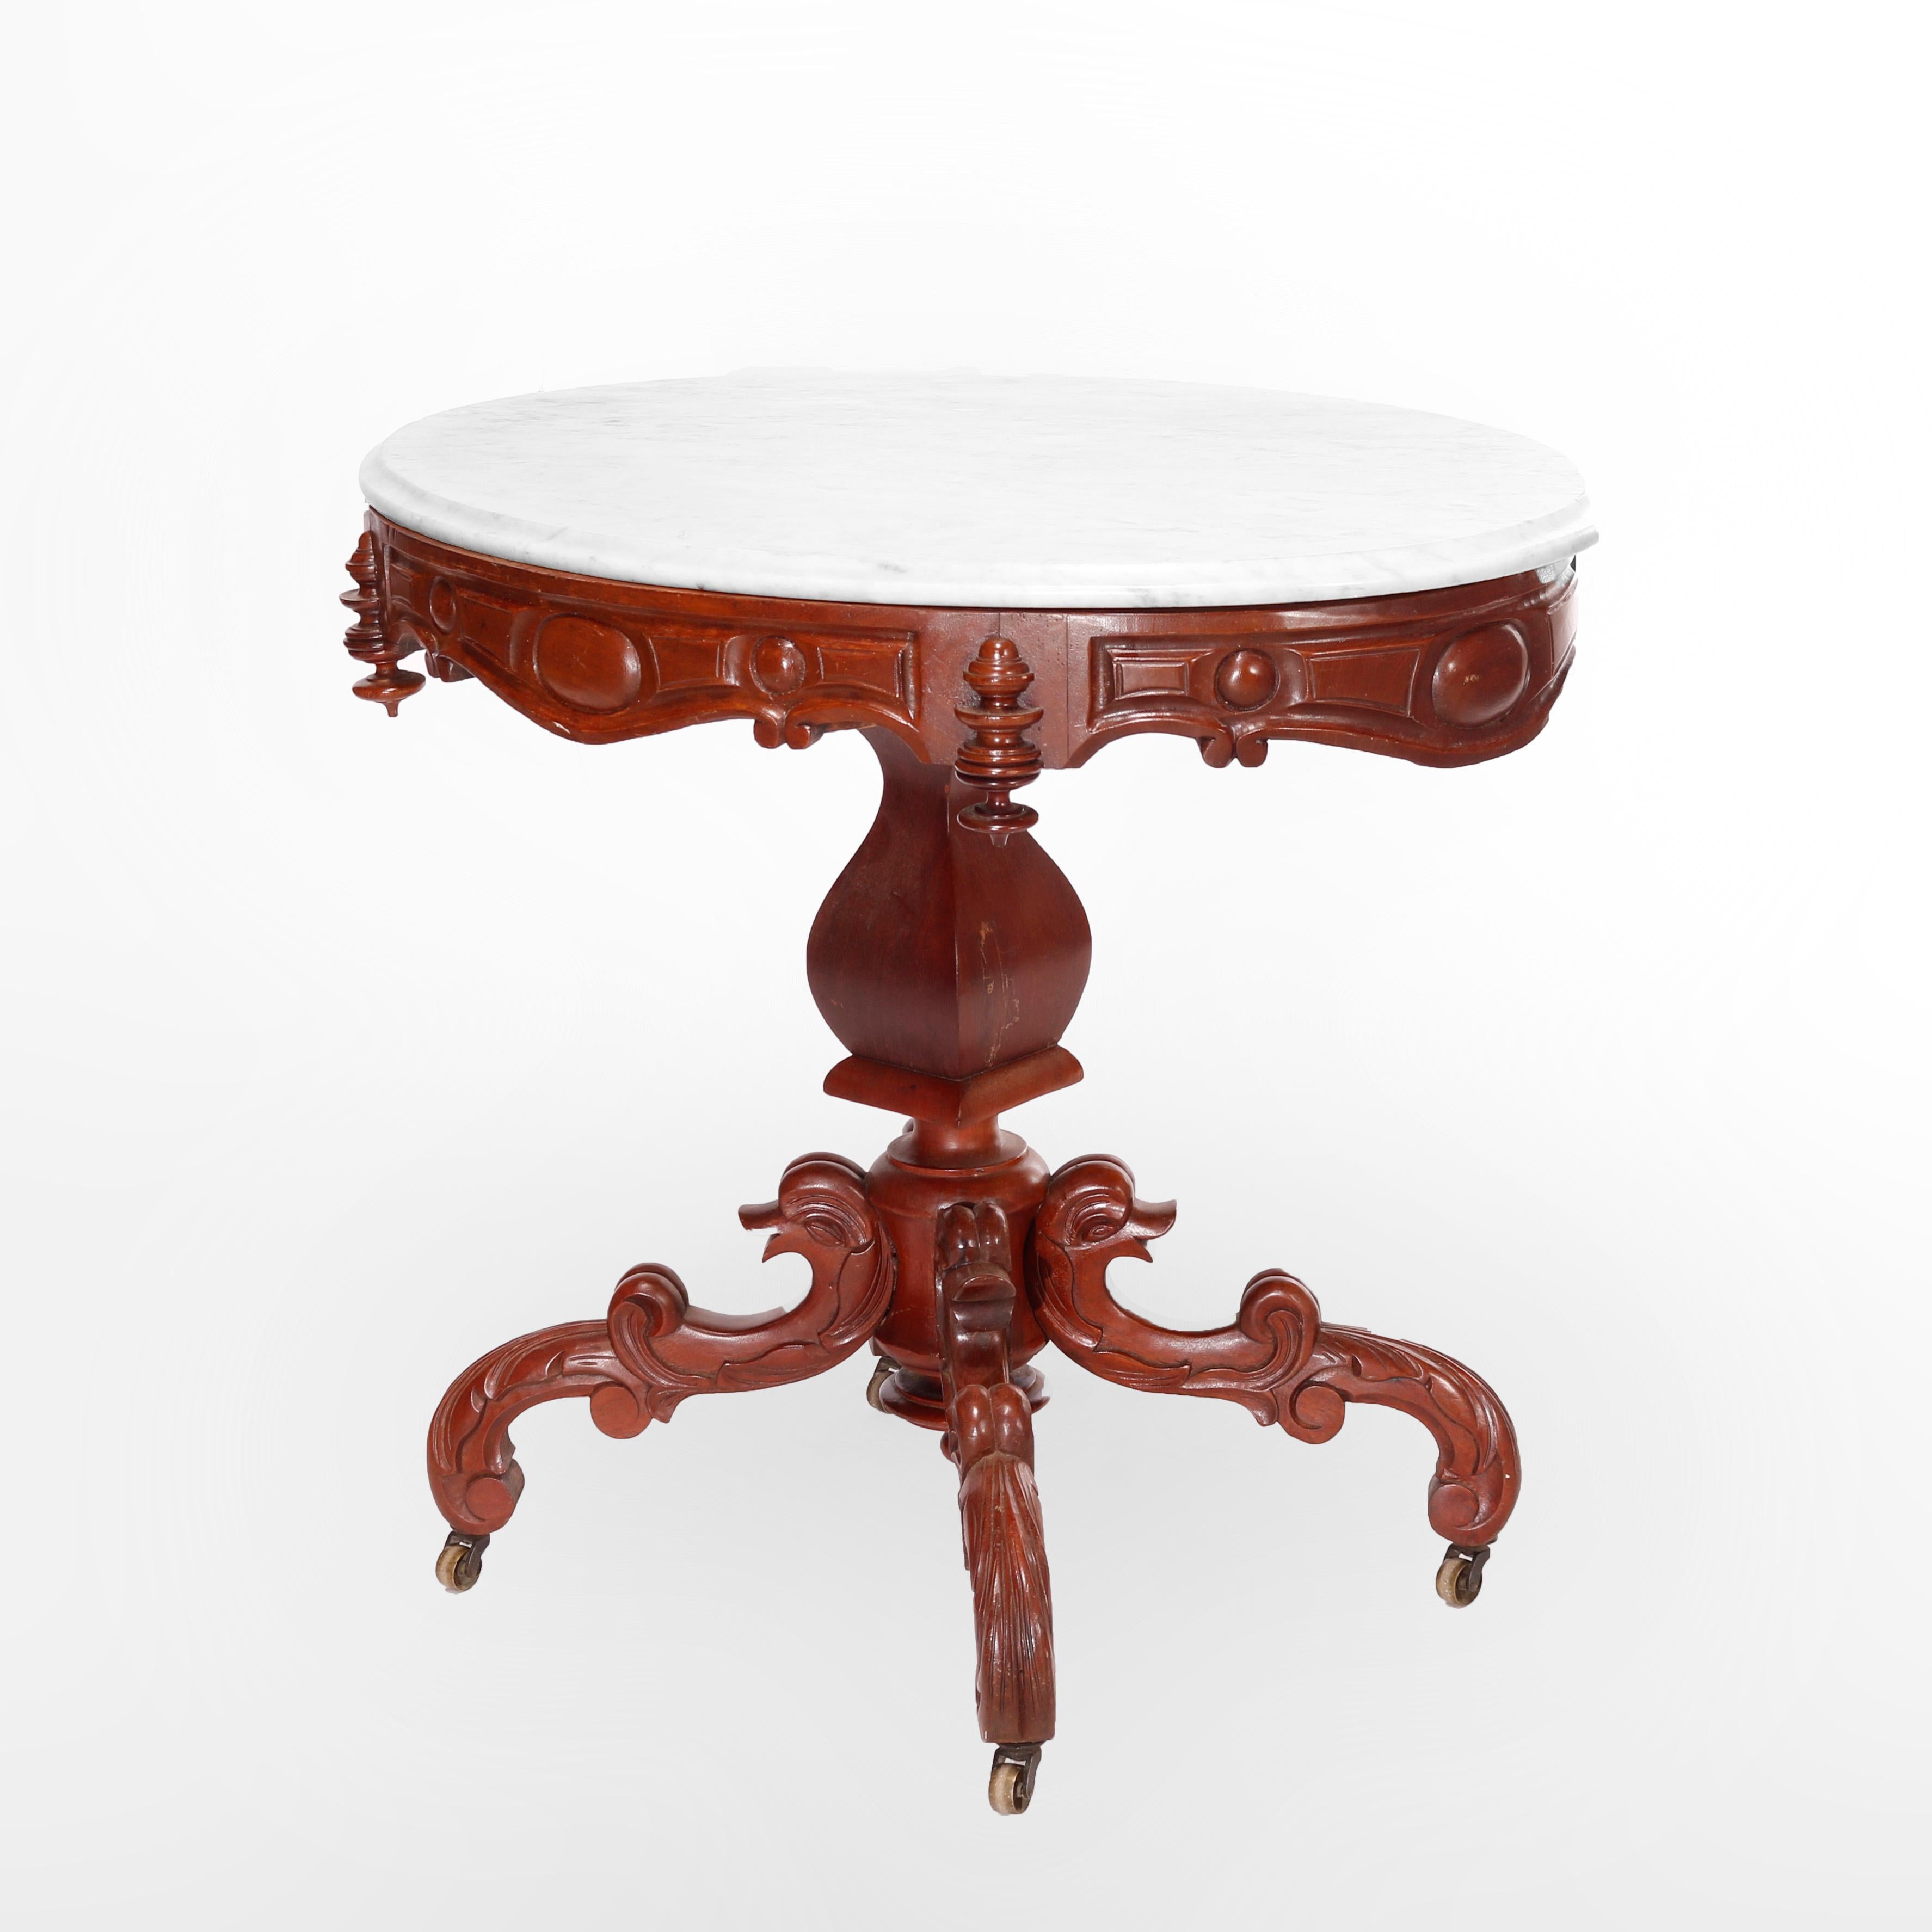 A Renaissance Revival center table offers oval beveled marble top over carved walnut base having shaped skirt and raised on center column having central urn form element raised on stylized scrolled gooseneck form legs, c1880

Measures - 29.5'' H x